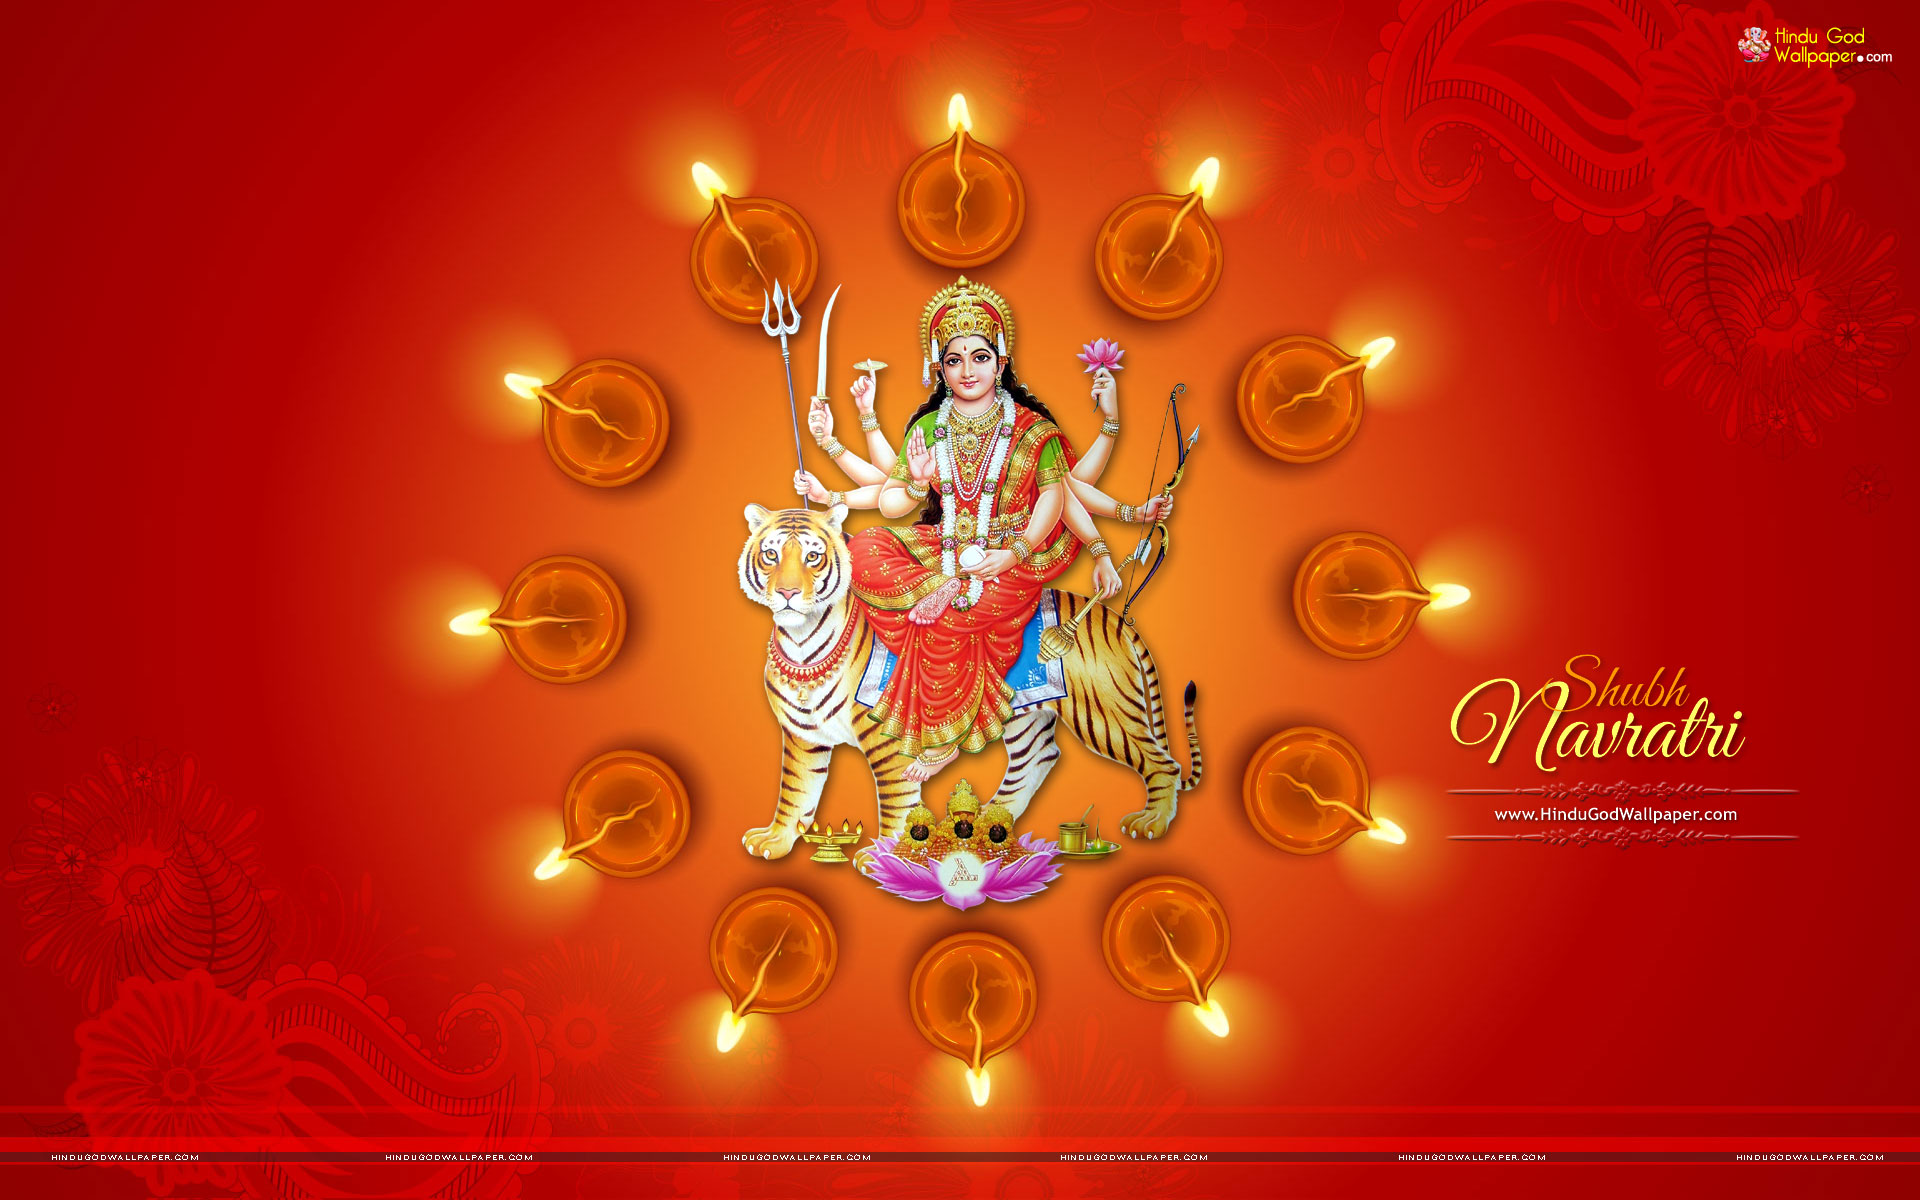 Navratri Wallpapers Full Size High Resolution Download